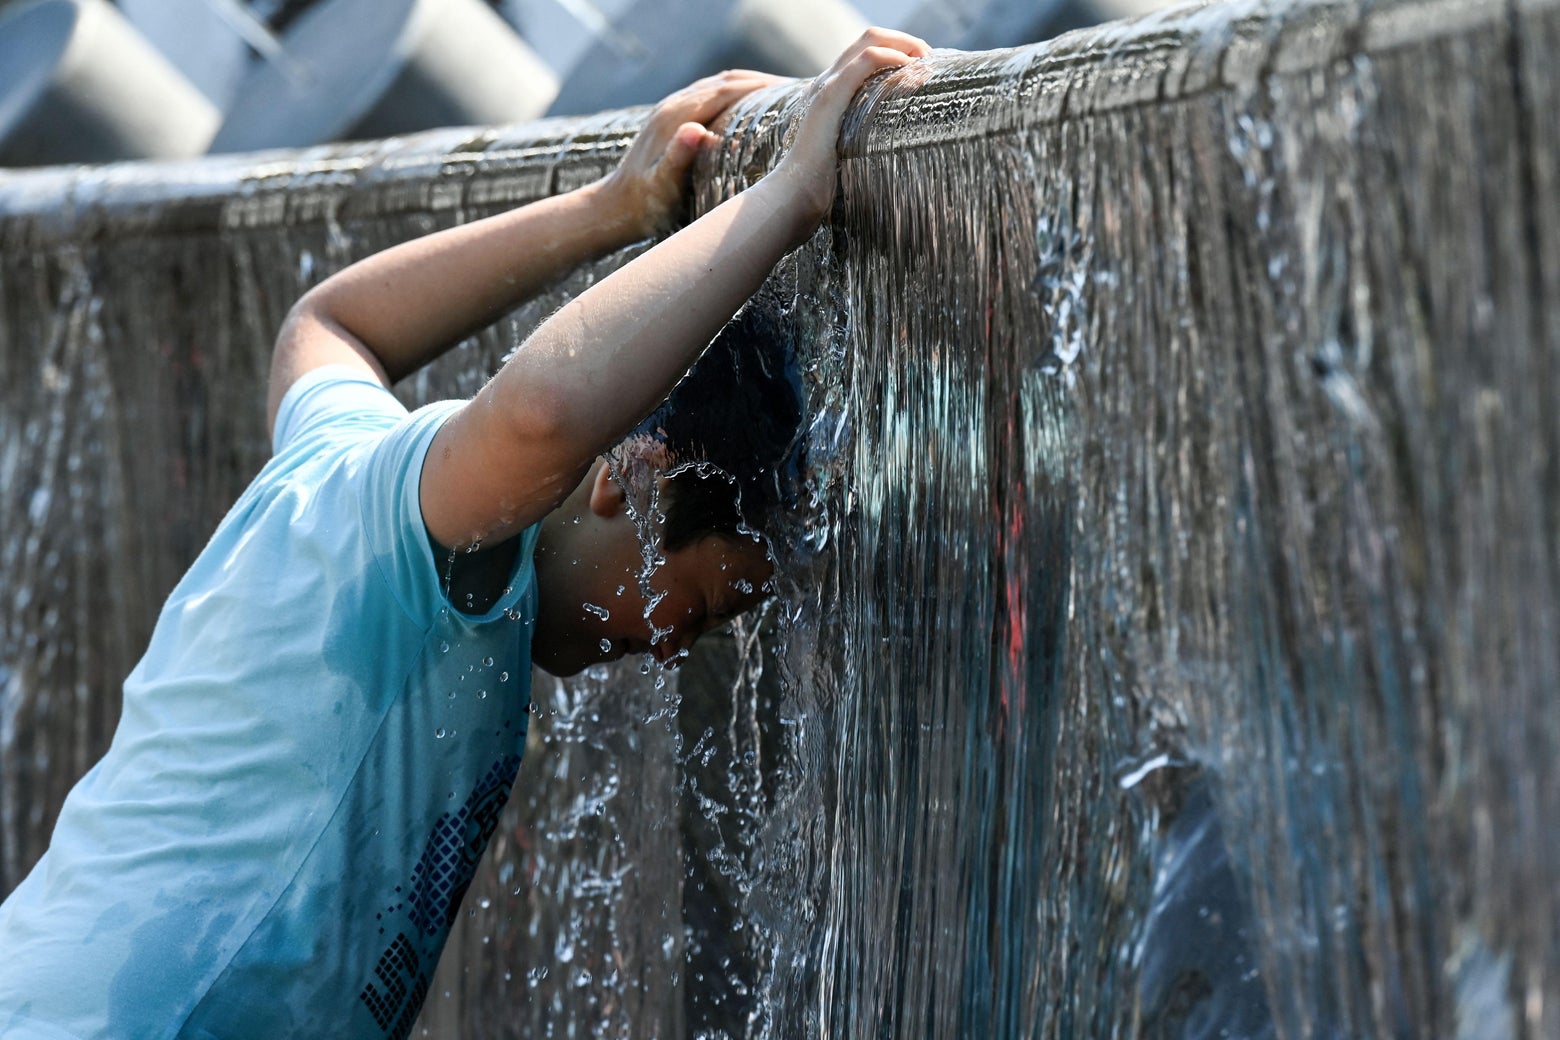 Too hot to handle: How to survive amid extreme heat and humidity